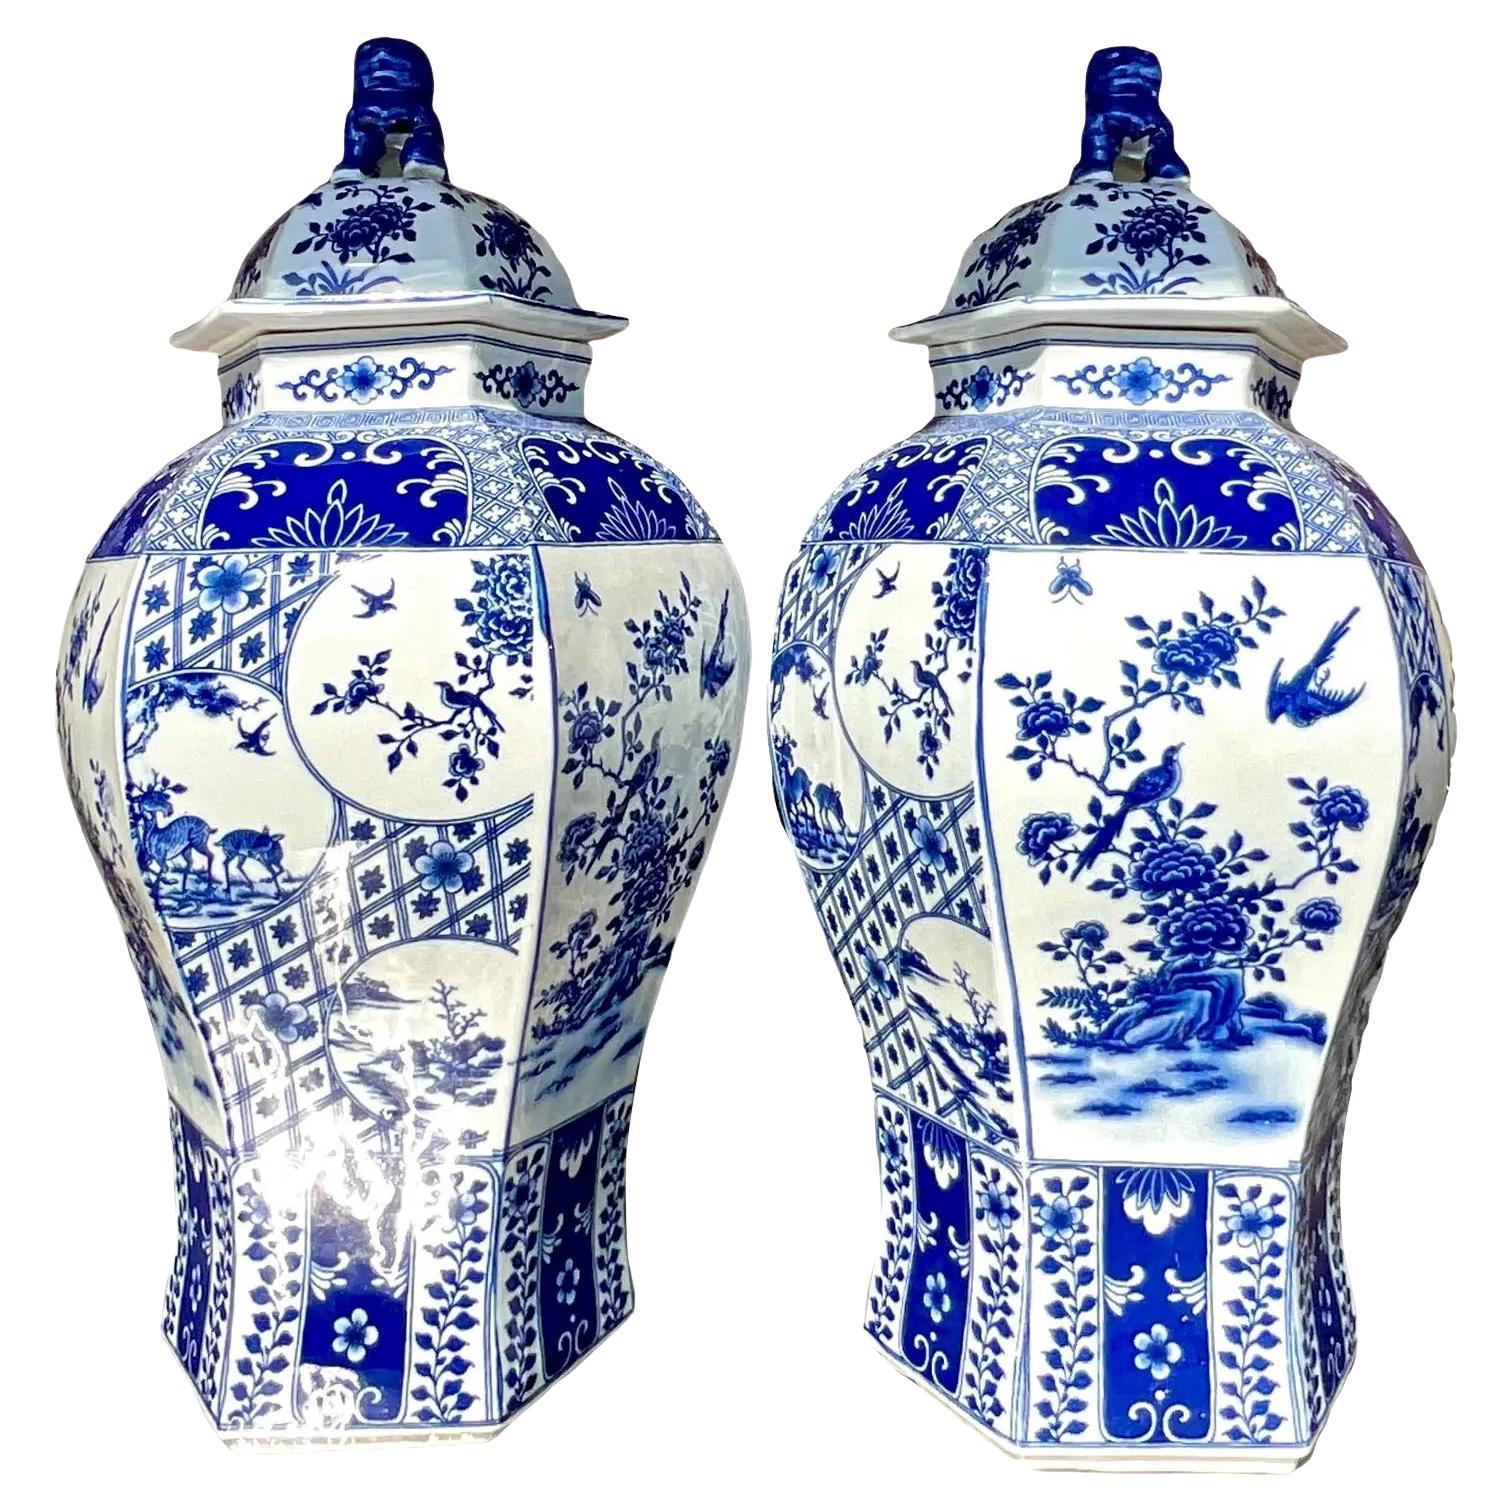 Vintage Asian Blue and White Urns - a Pair For Sale